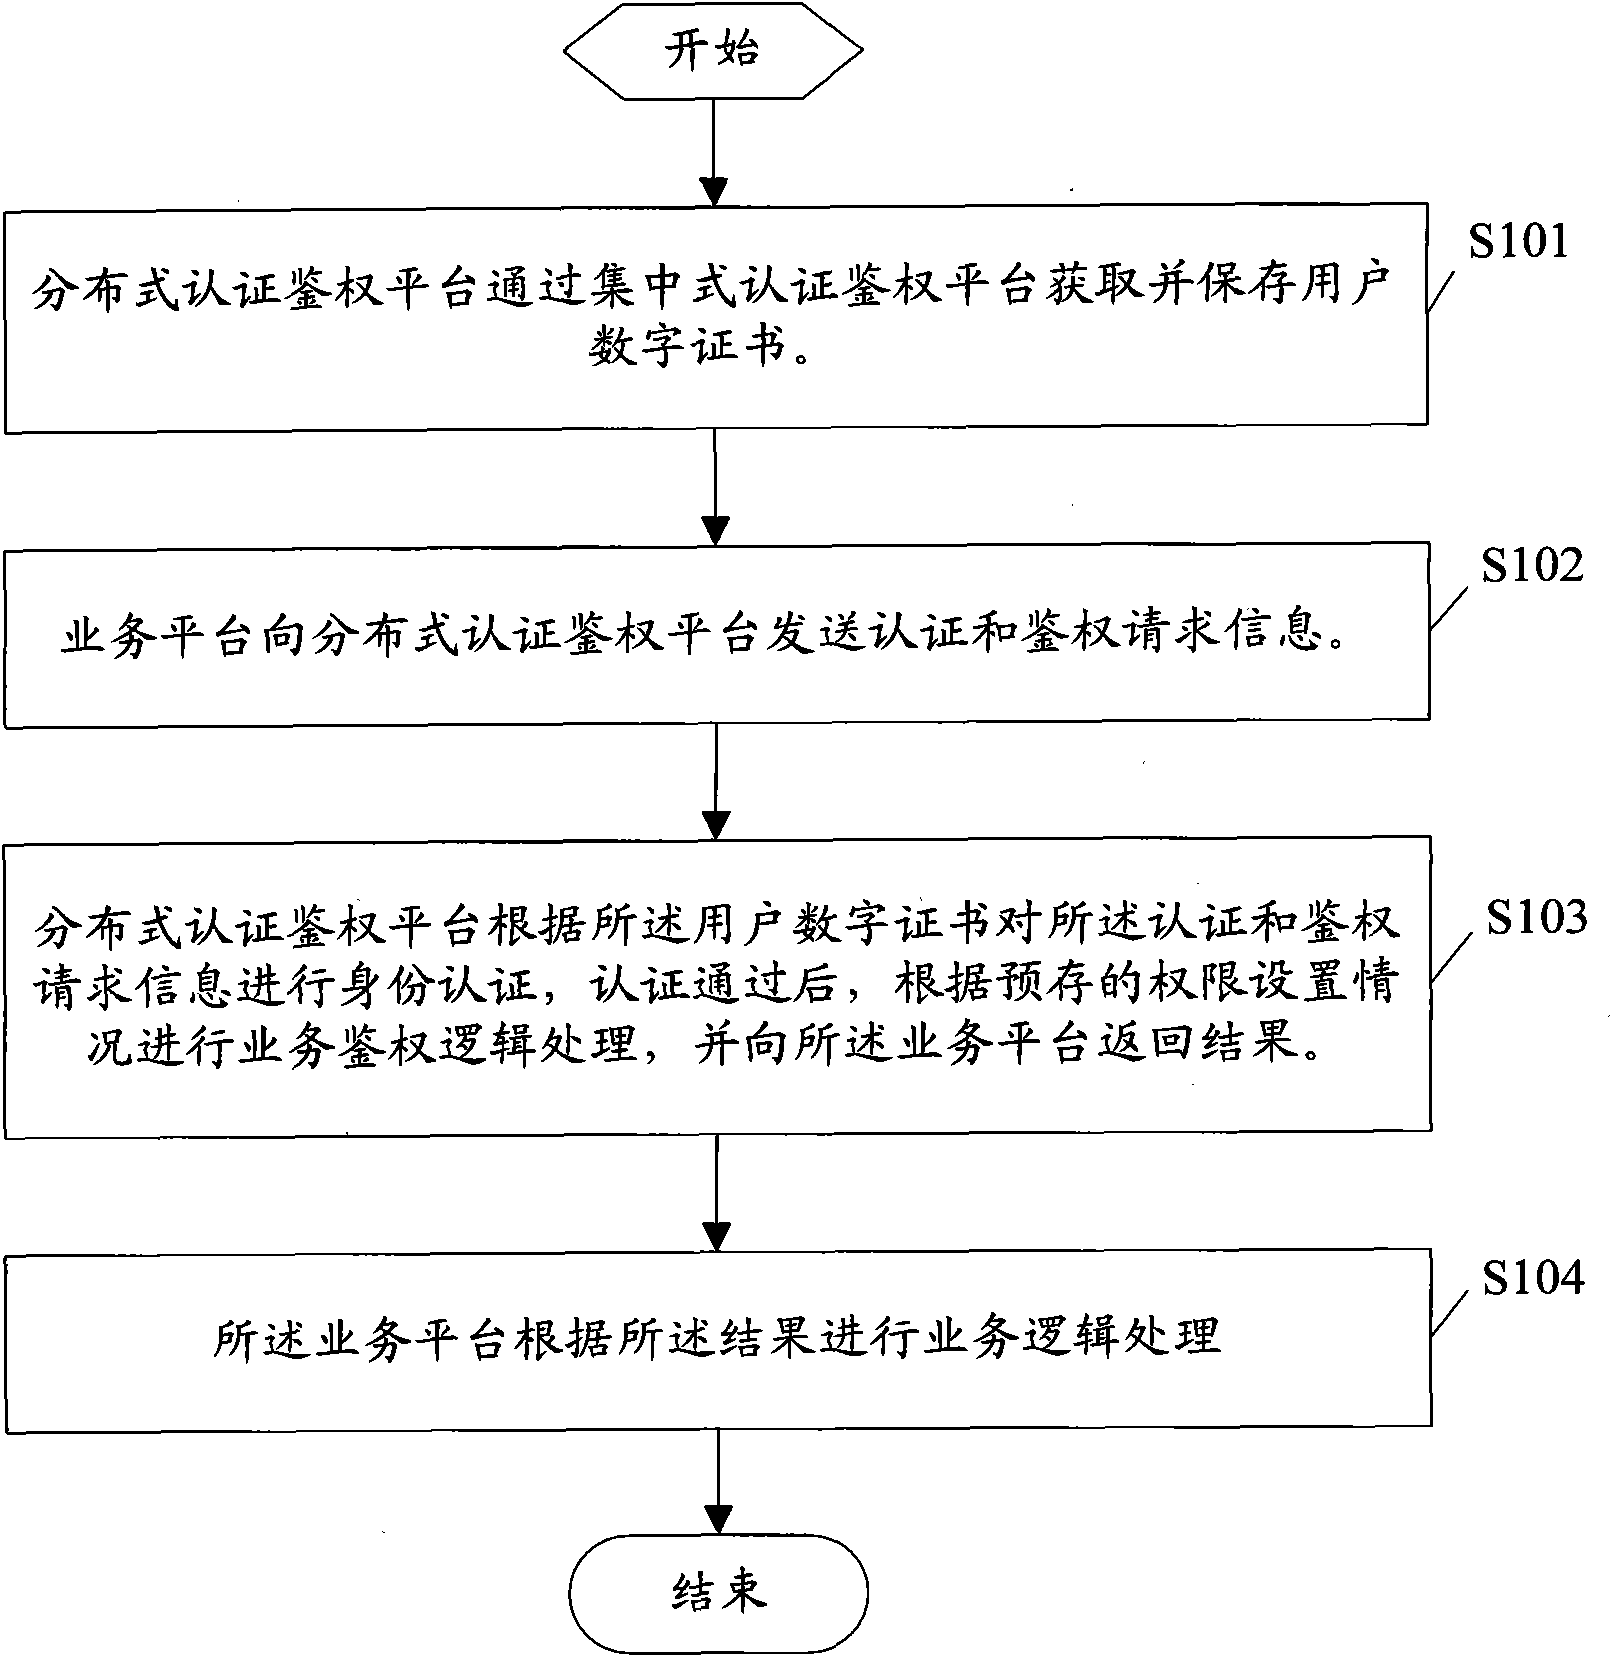 Distributive enterprise identification authentication method, system and embedded terminal